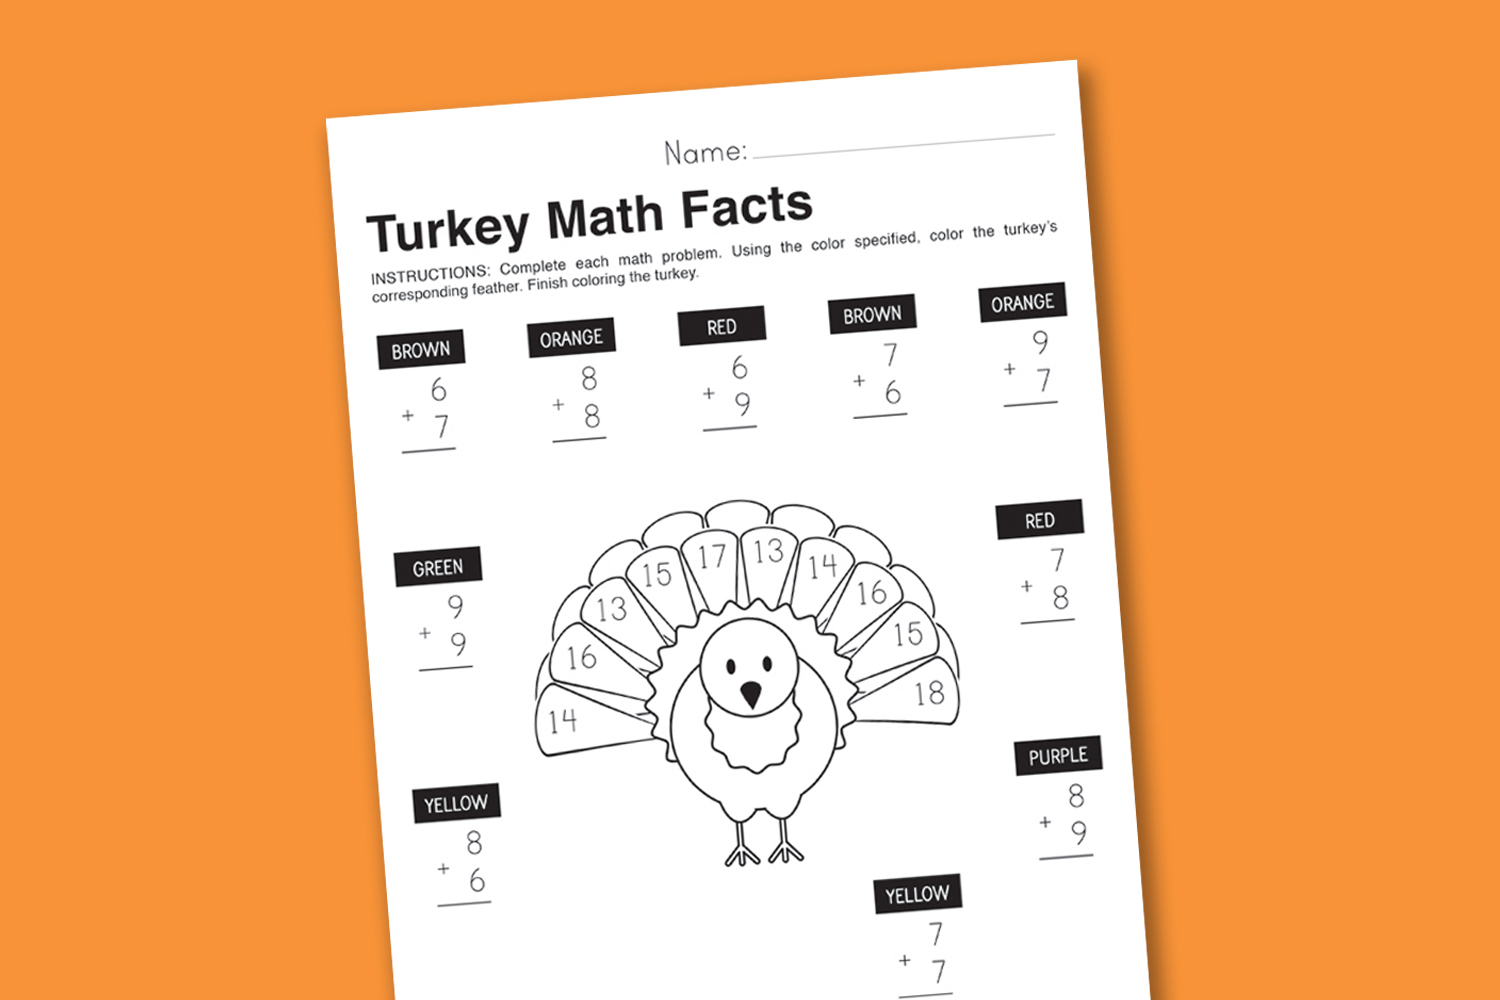 Worksheet Wednesday: Turkey Math Facts - Paging Supermom | Free Printable Thanksgiving Math Worksheets